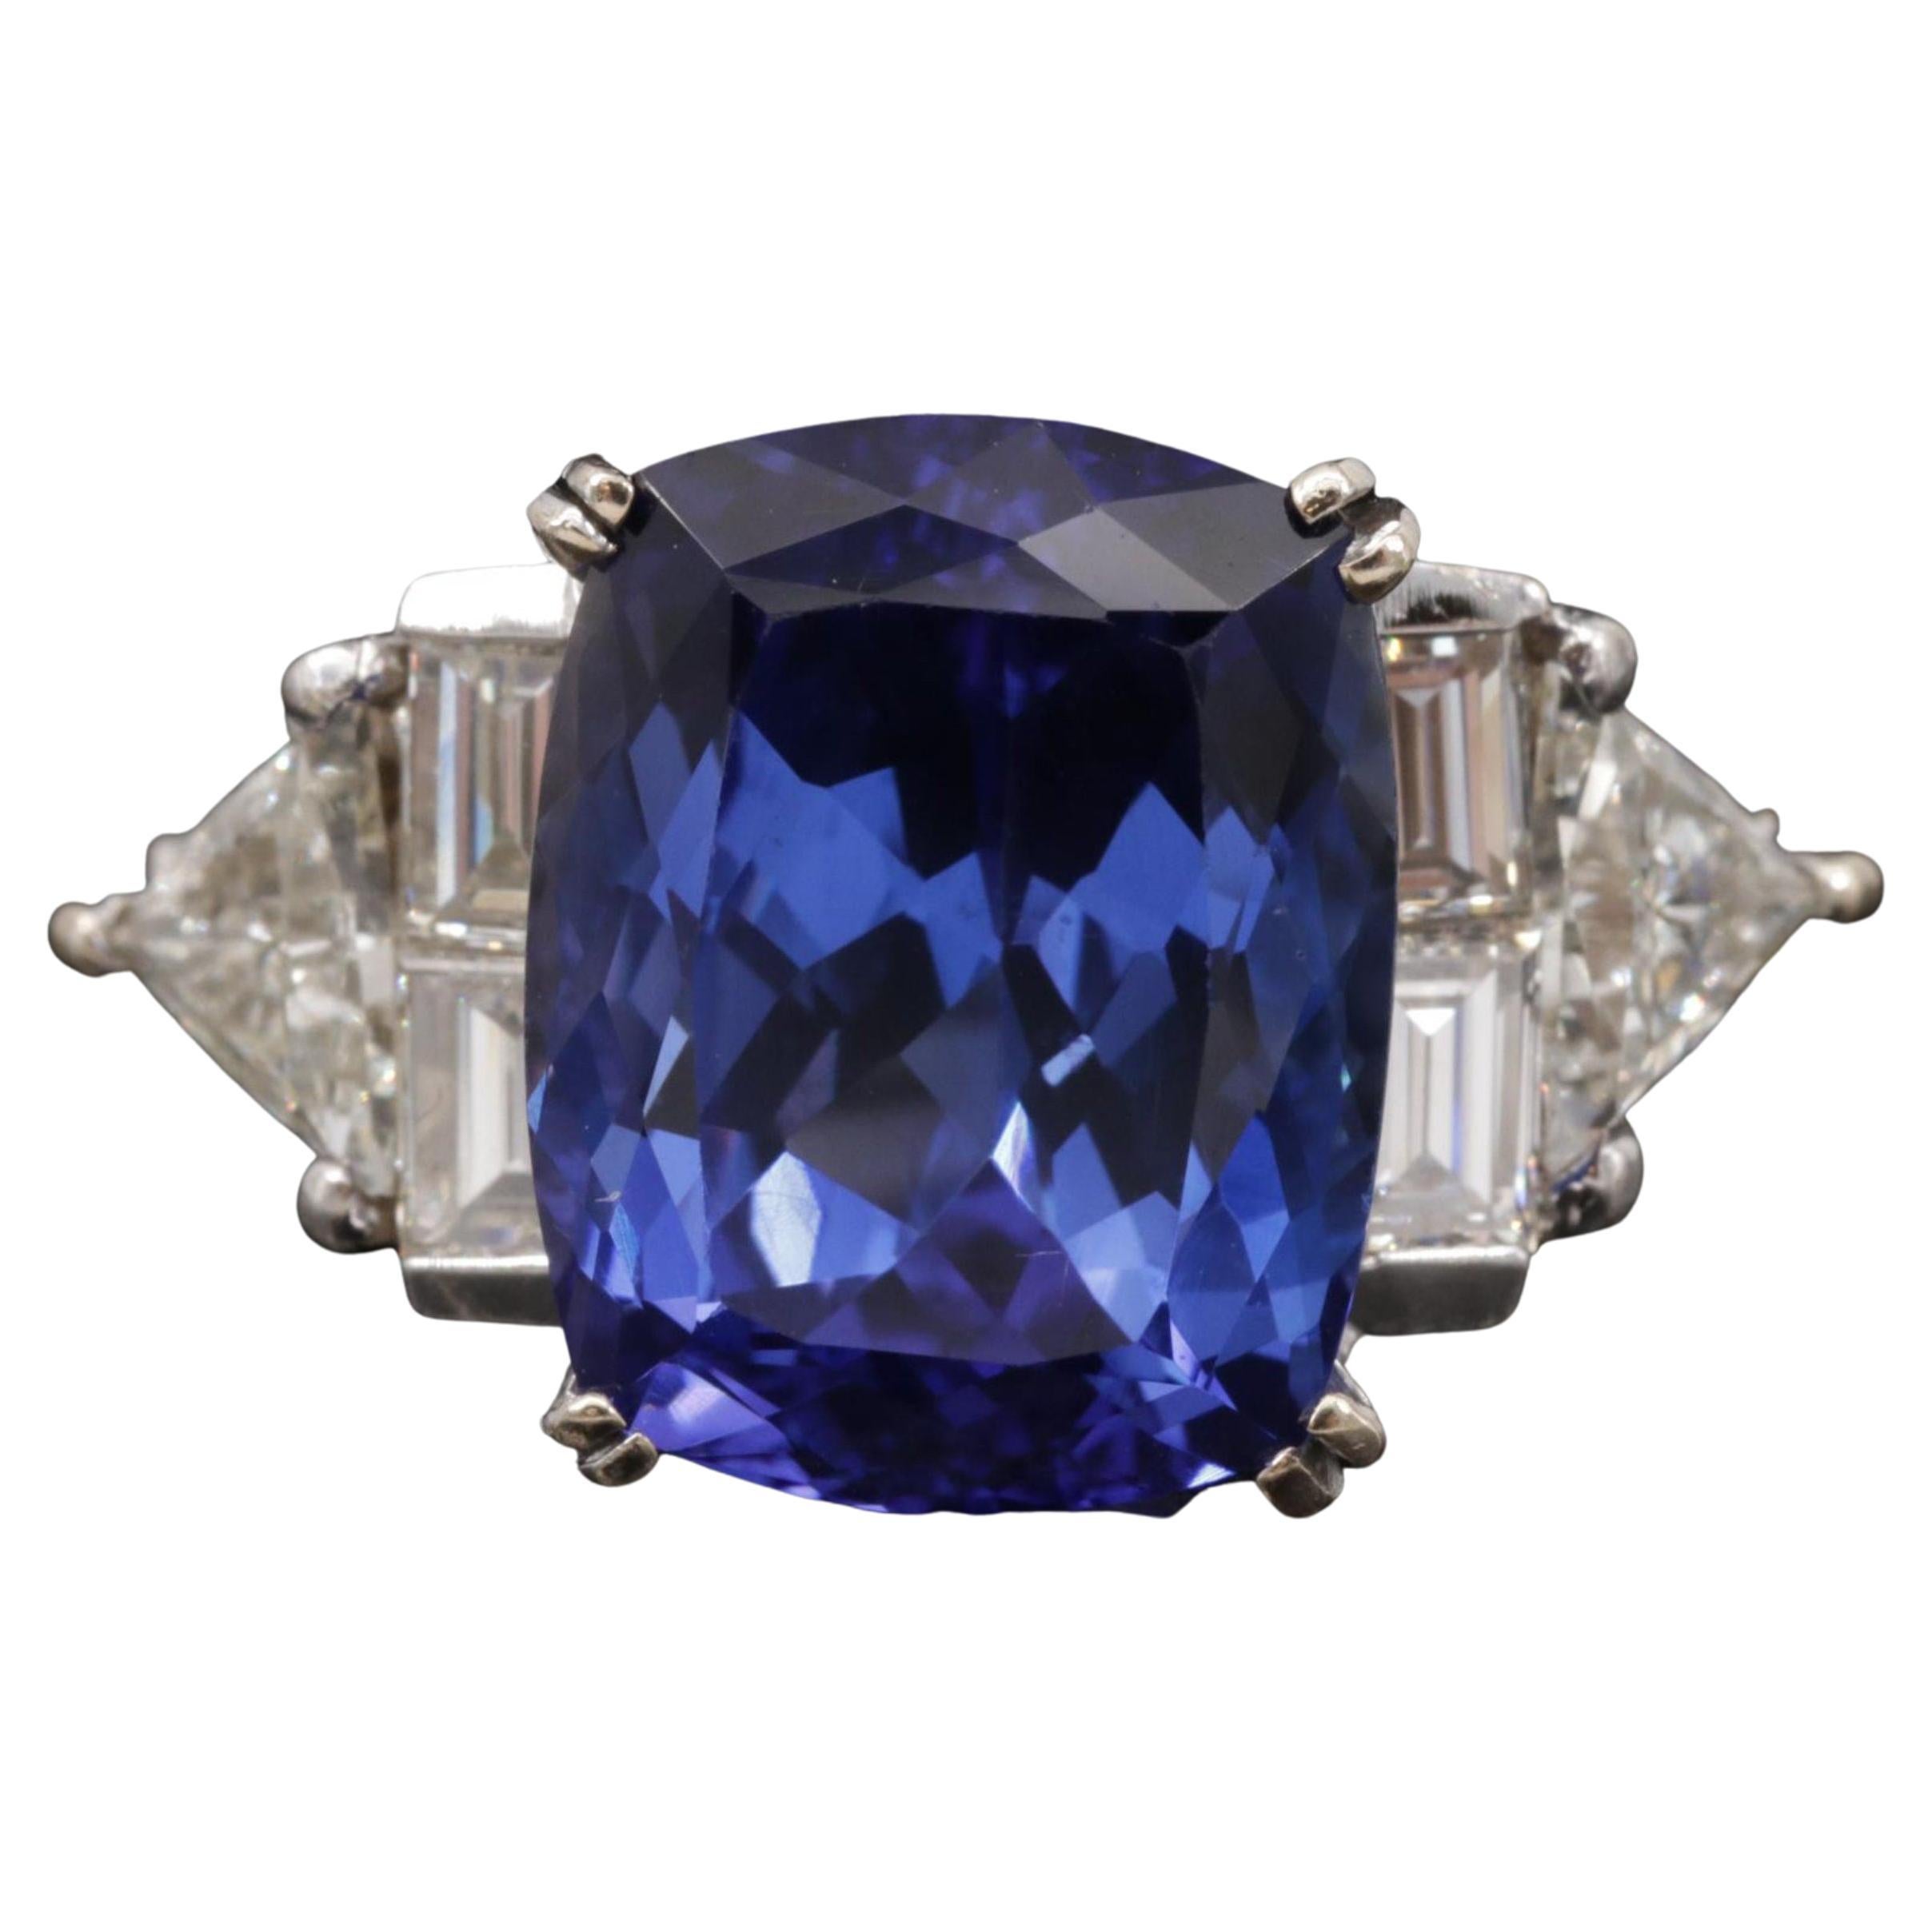 For Sale:  4 Carat Natural Sapphire Diamond Engagement Ring Set in 18K Gold, Cocktail Ring